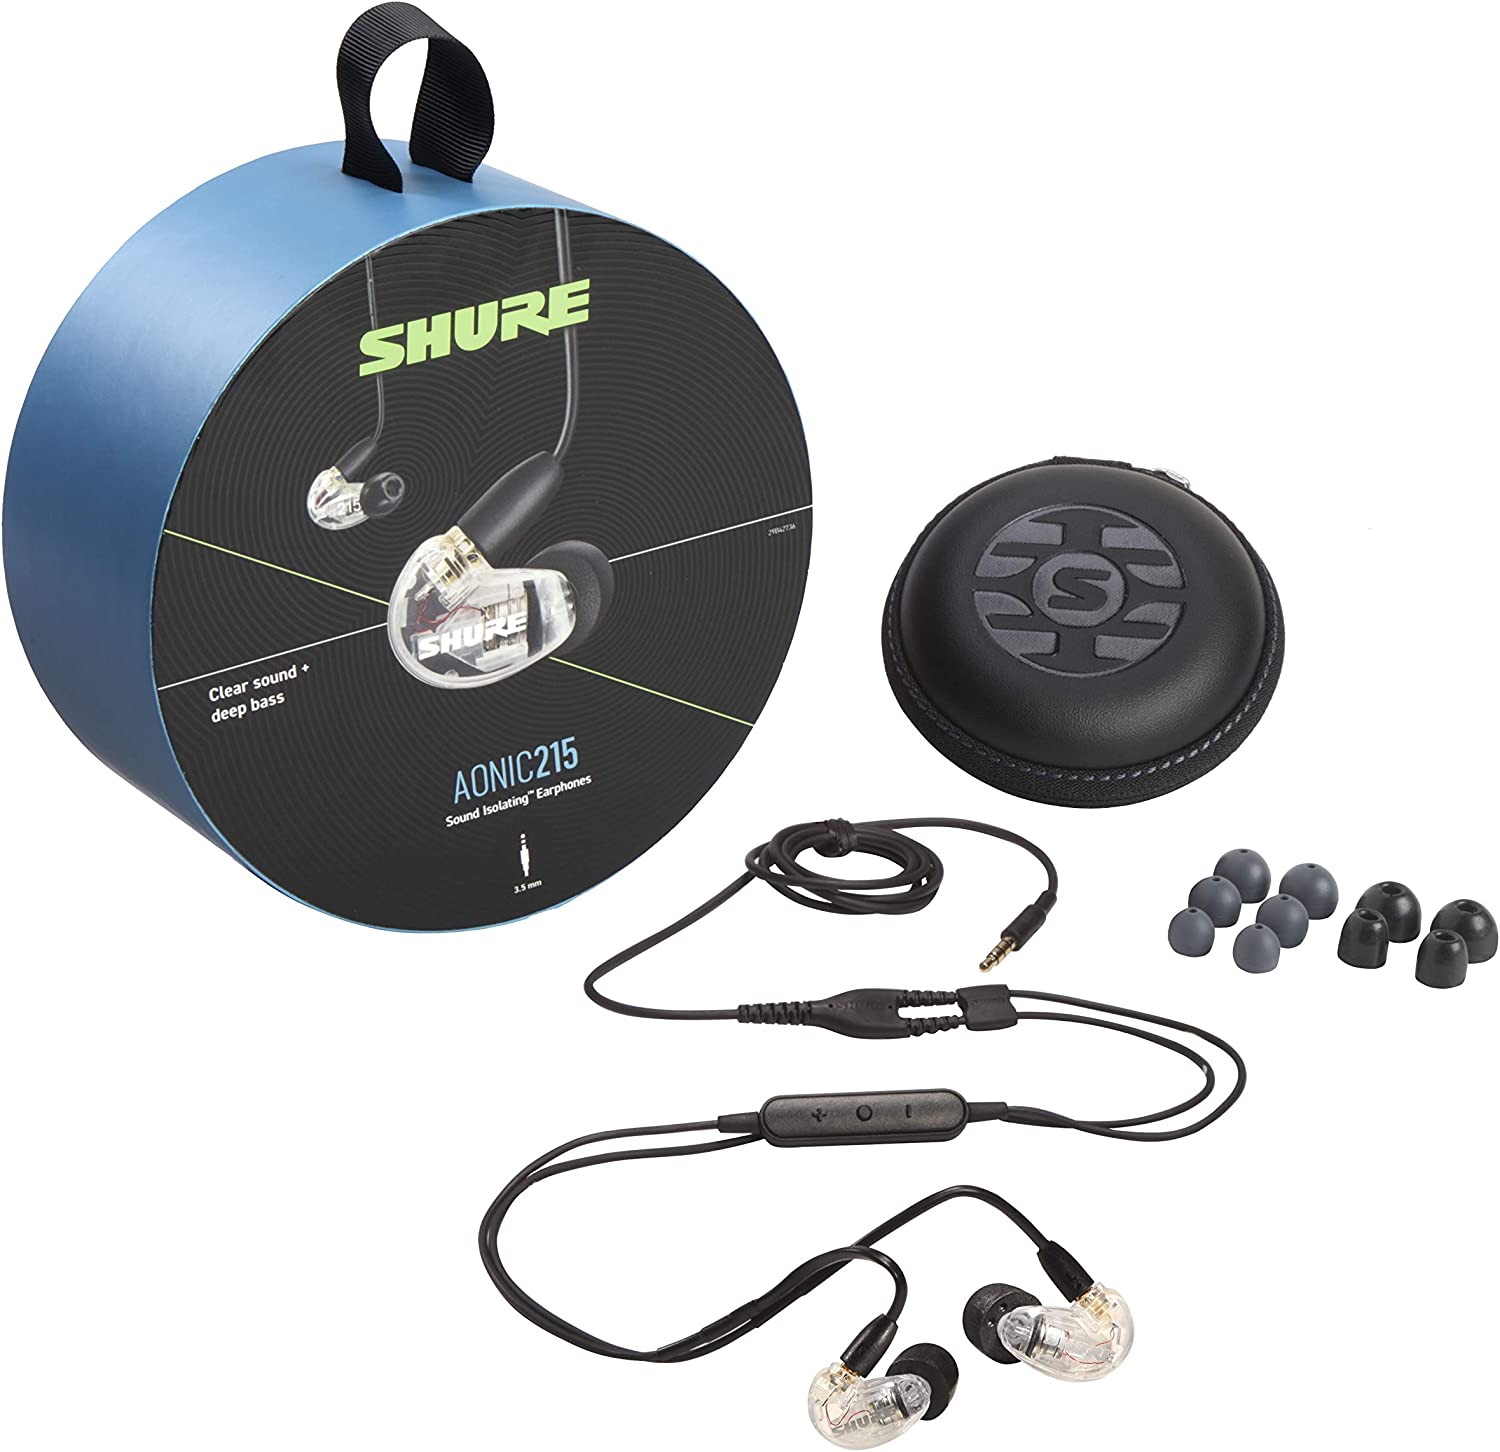 SHURE AONIC 215 SOUND ISOLATING EARPHONES - CLEAR